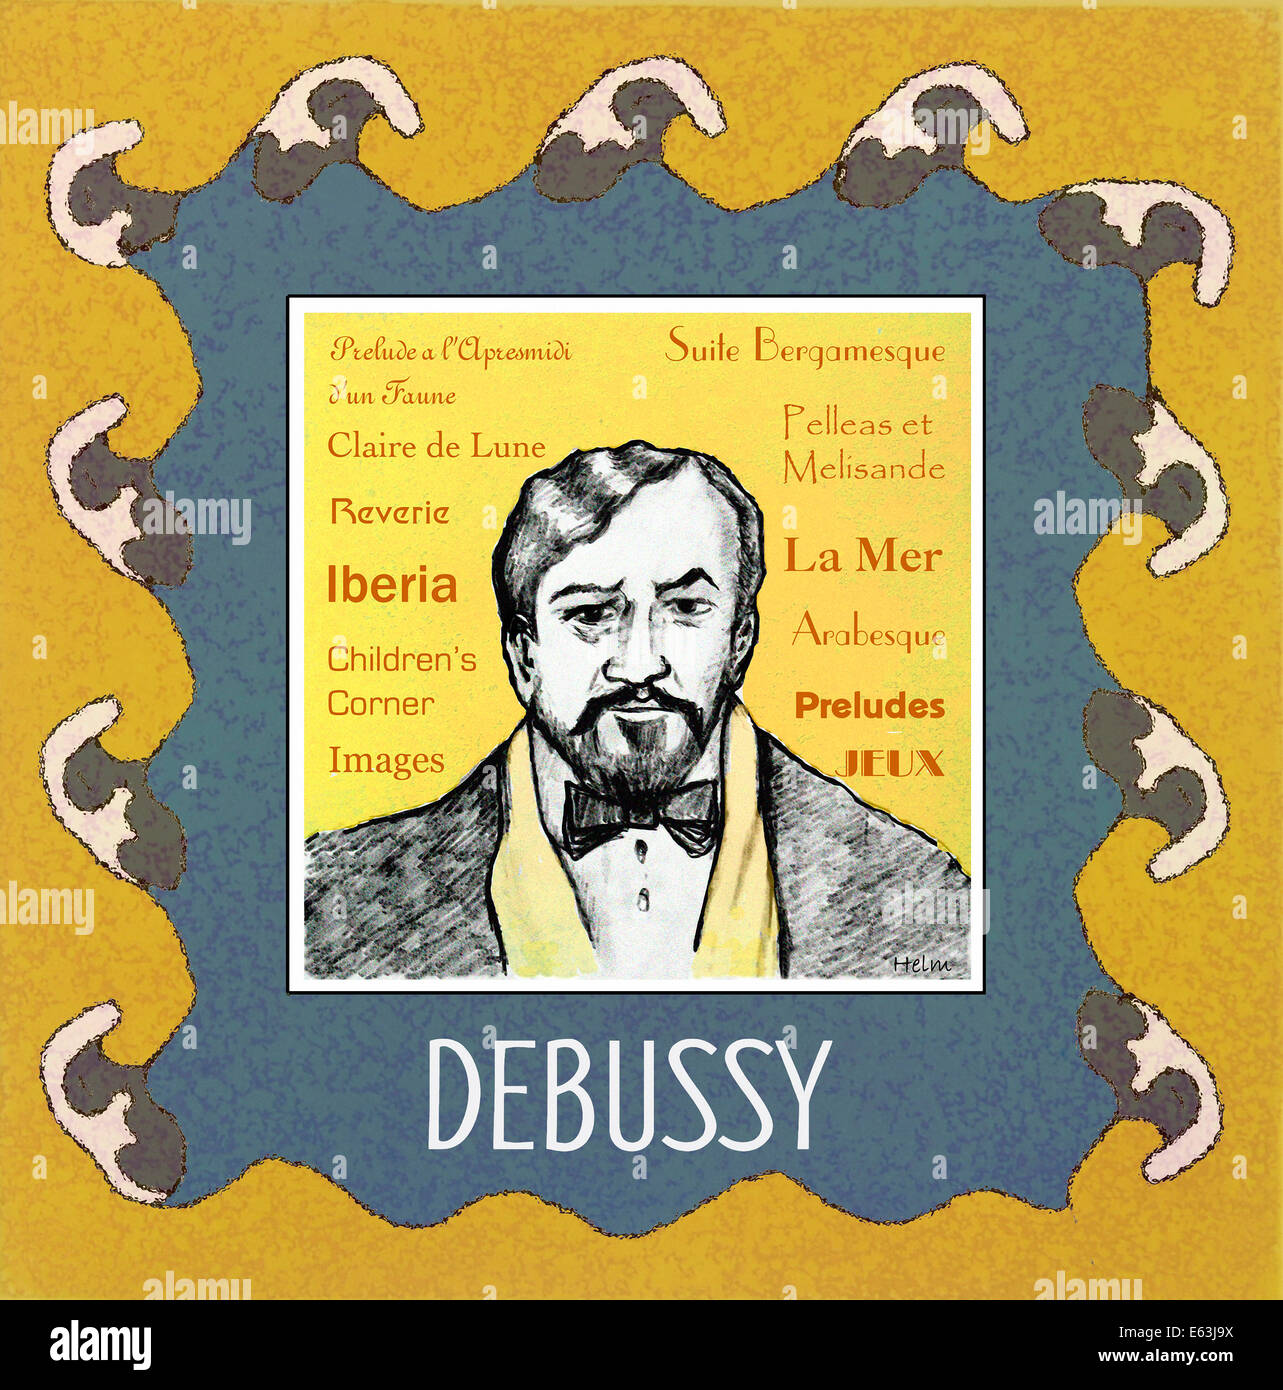 Claude Debussy illustration, French composer. 1862 - 1918 Stock Photo